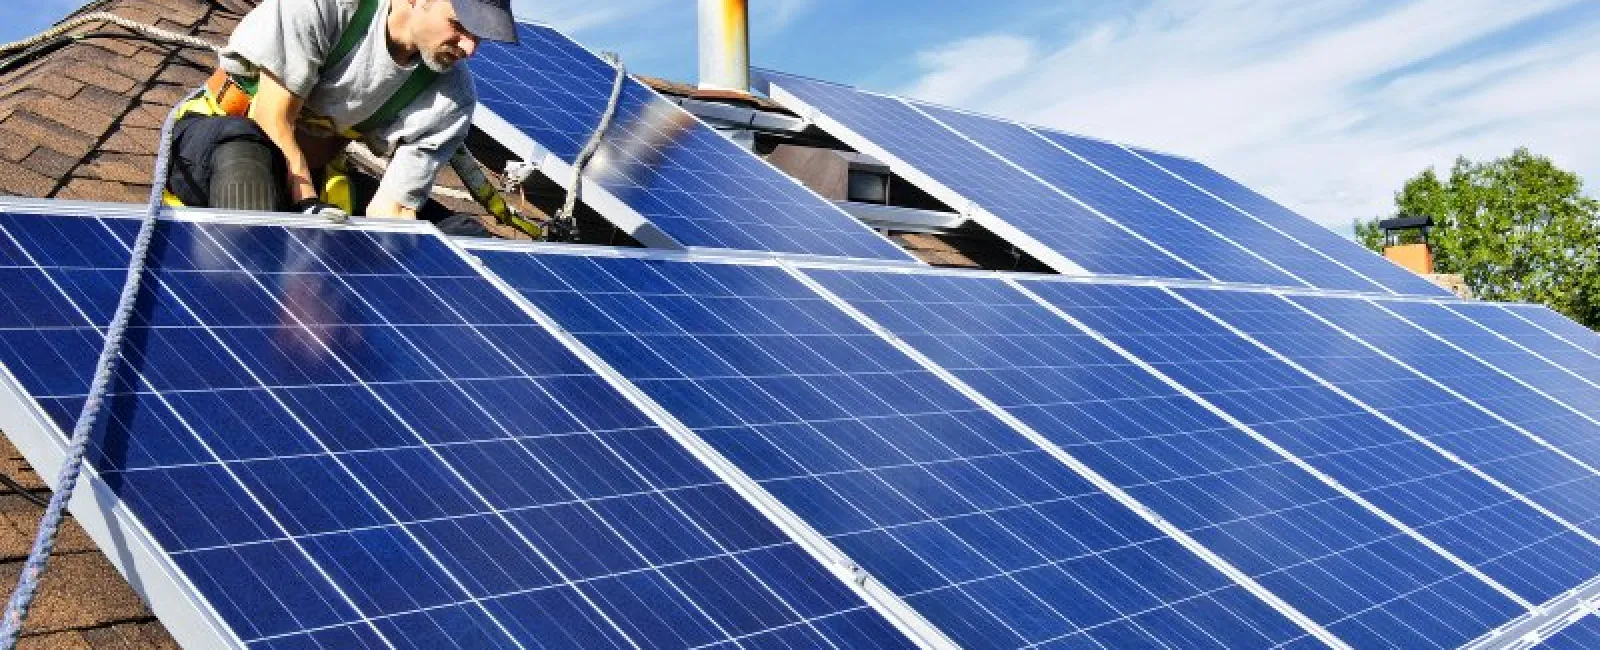 Are Solar Panels Right For Your Roof?